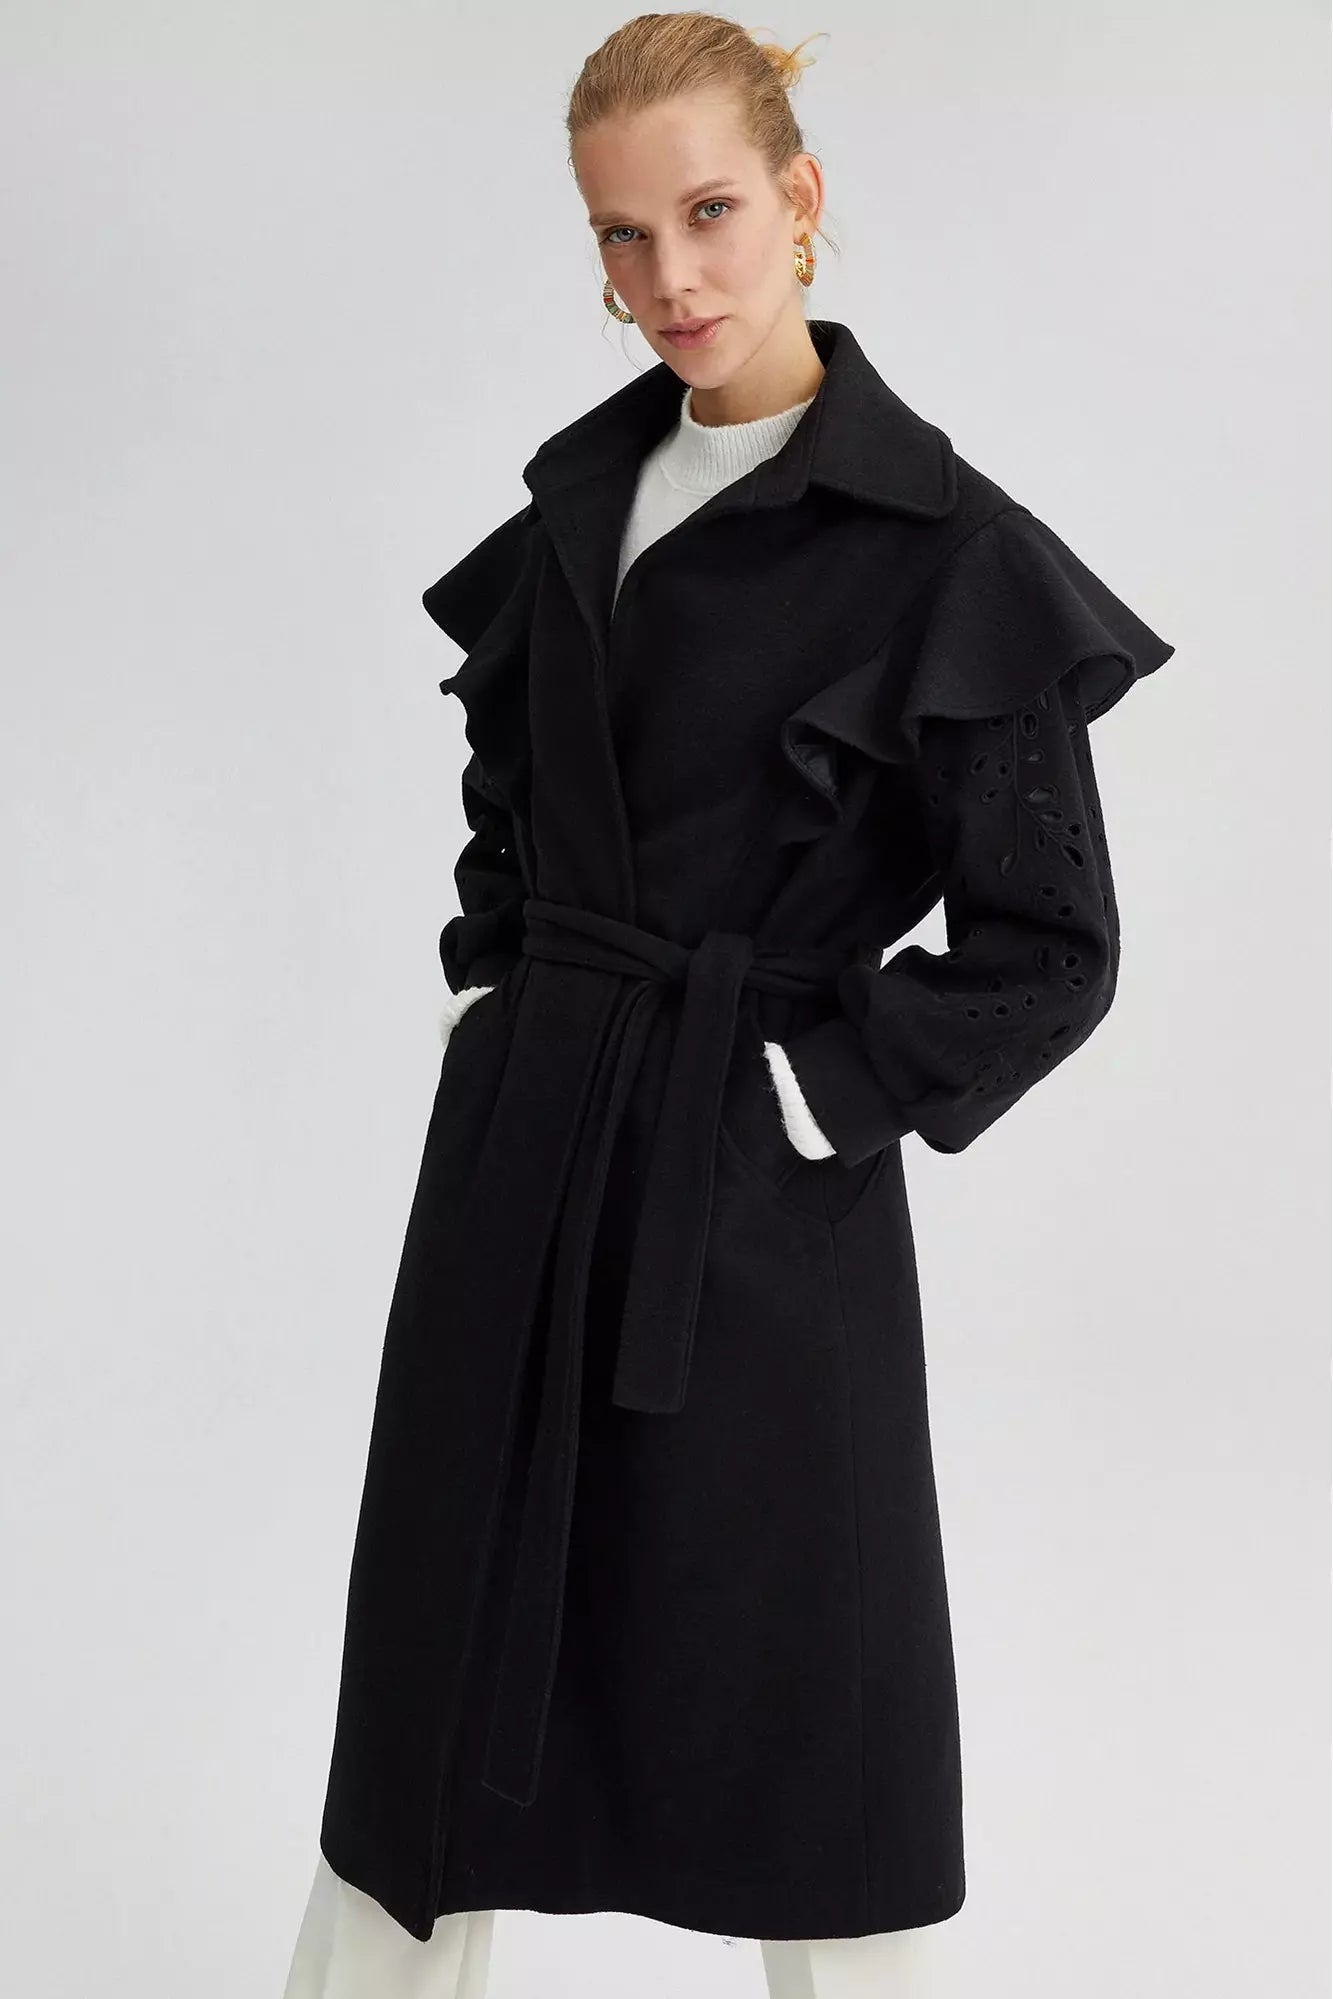 Lace Detailed Coat With Belt - By Baano